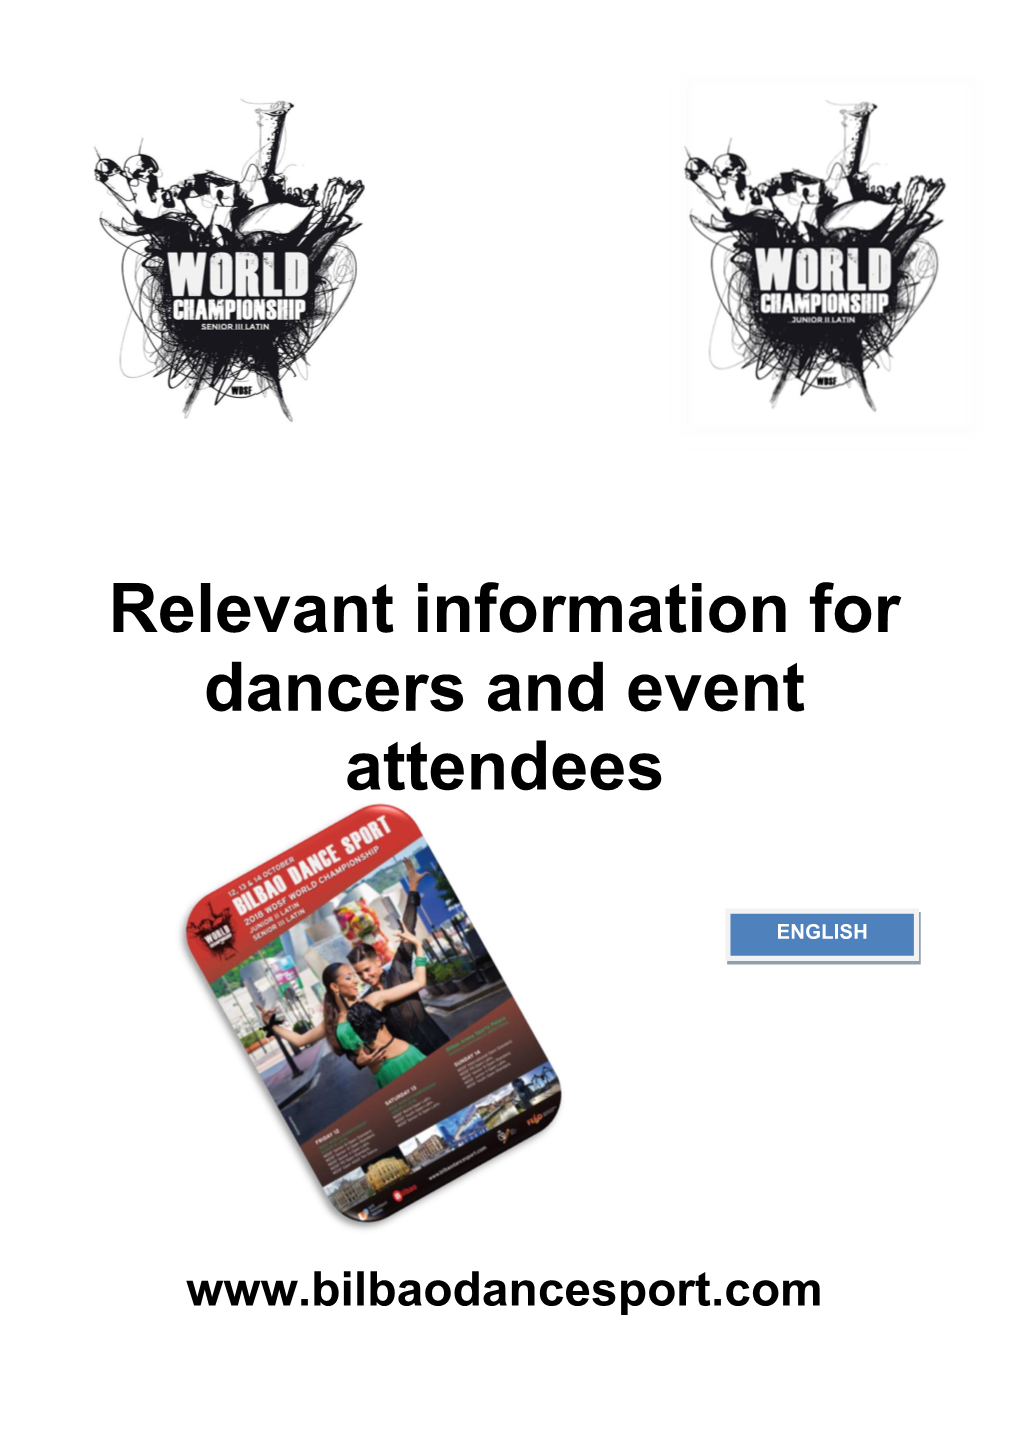 Relevant Information for Dancers and Event Attendees